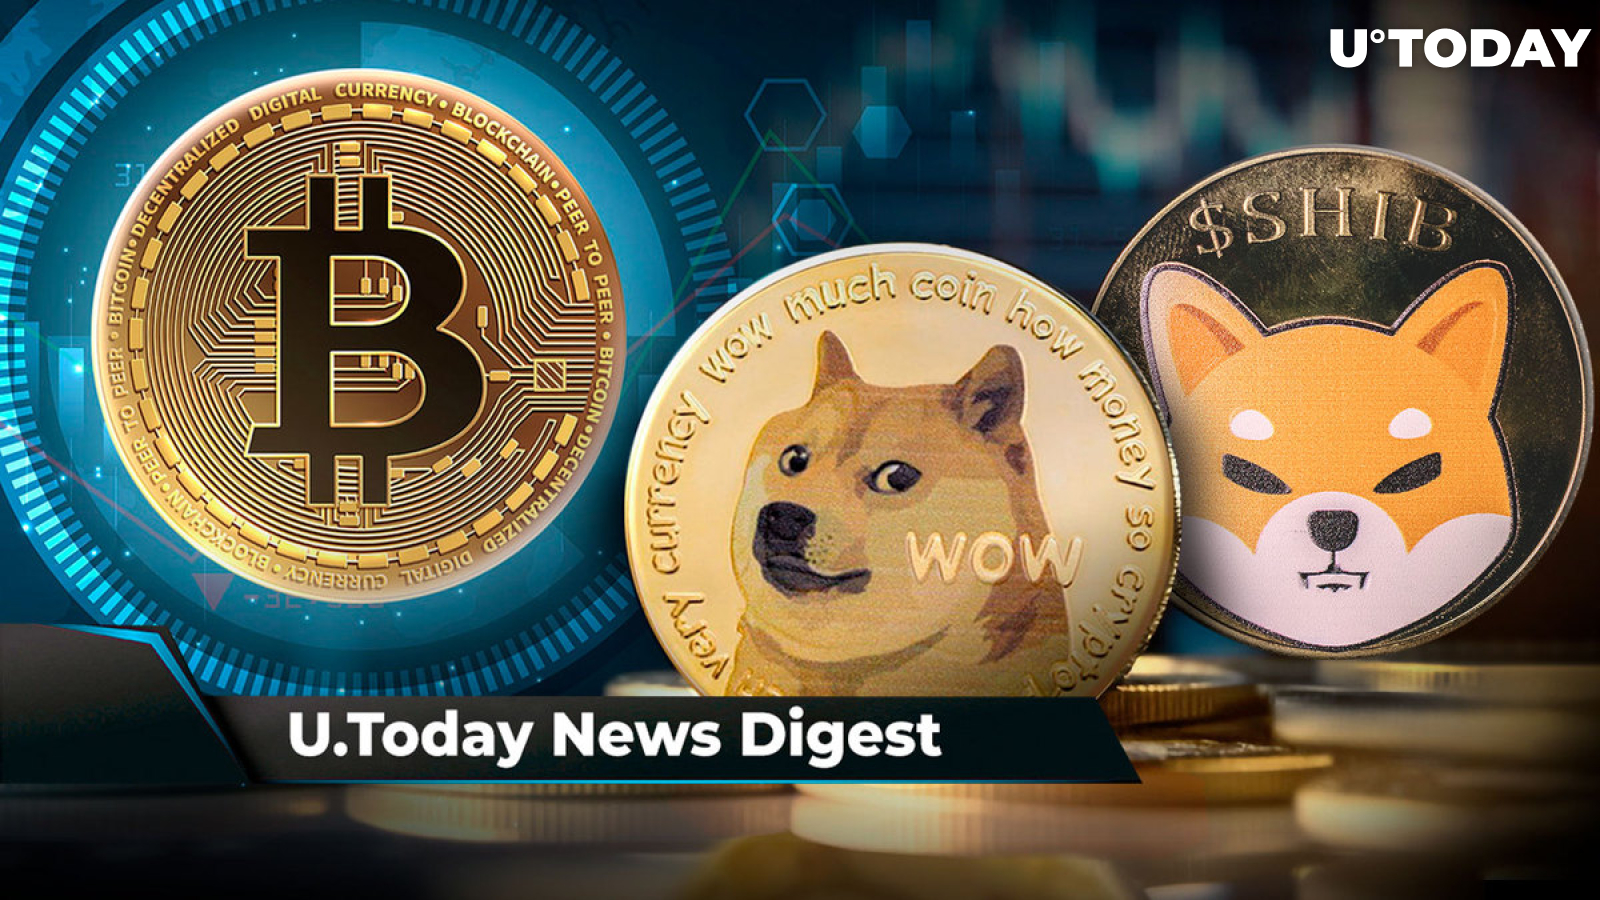 671,000 BTC Bought by Million Bitcoin Addresses at This Demand Zone, DOGE Rally Leaves 80% of Investors in Profit, 3 Trillion SHIB Moved to Robinhood Address: Crypto News Digest by U.Today